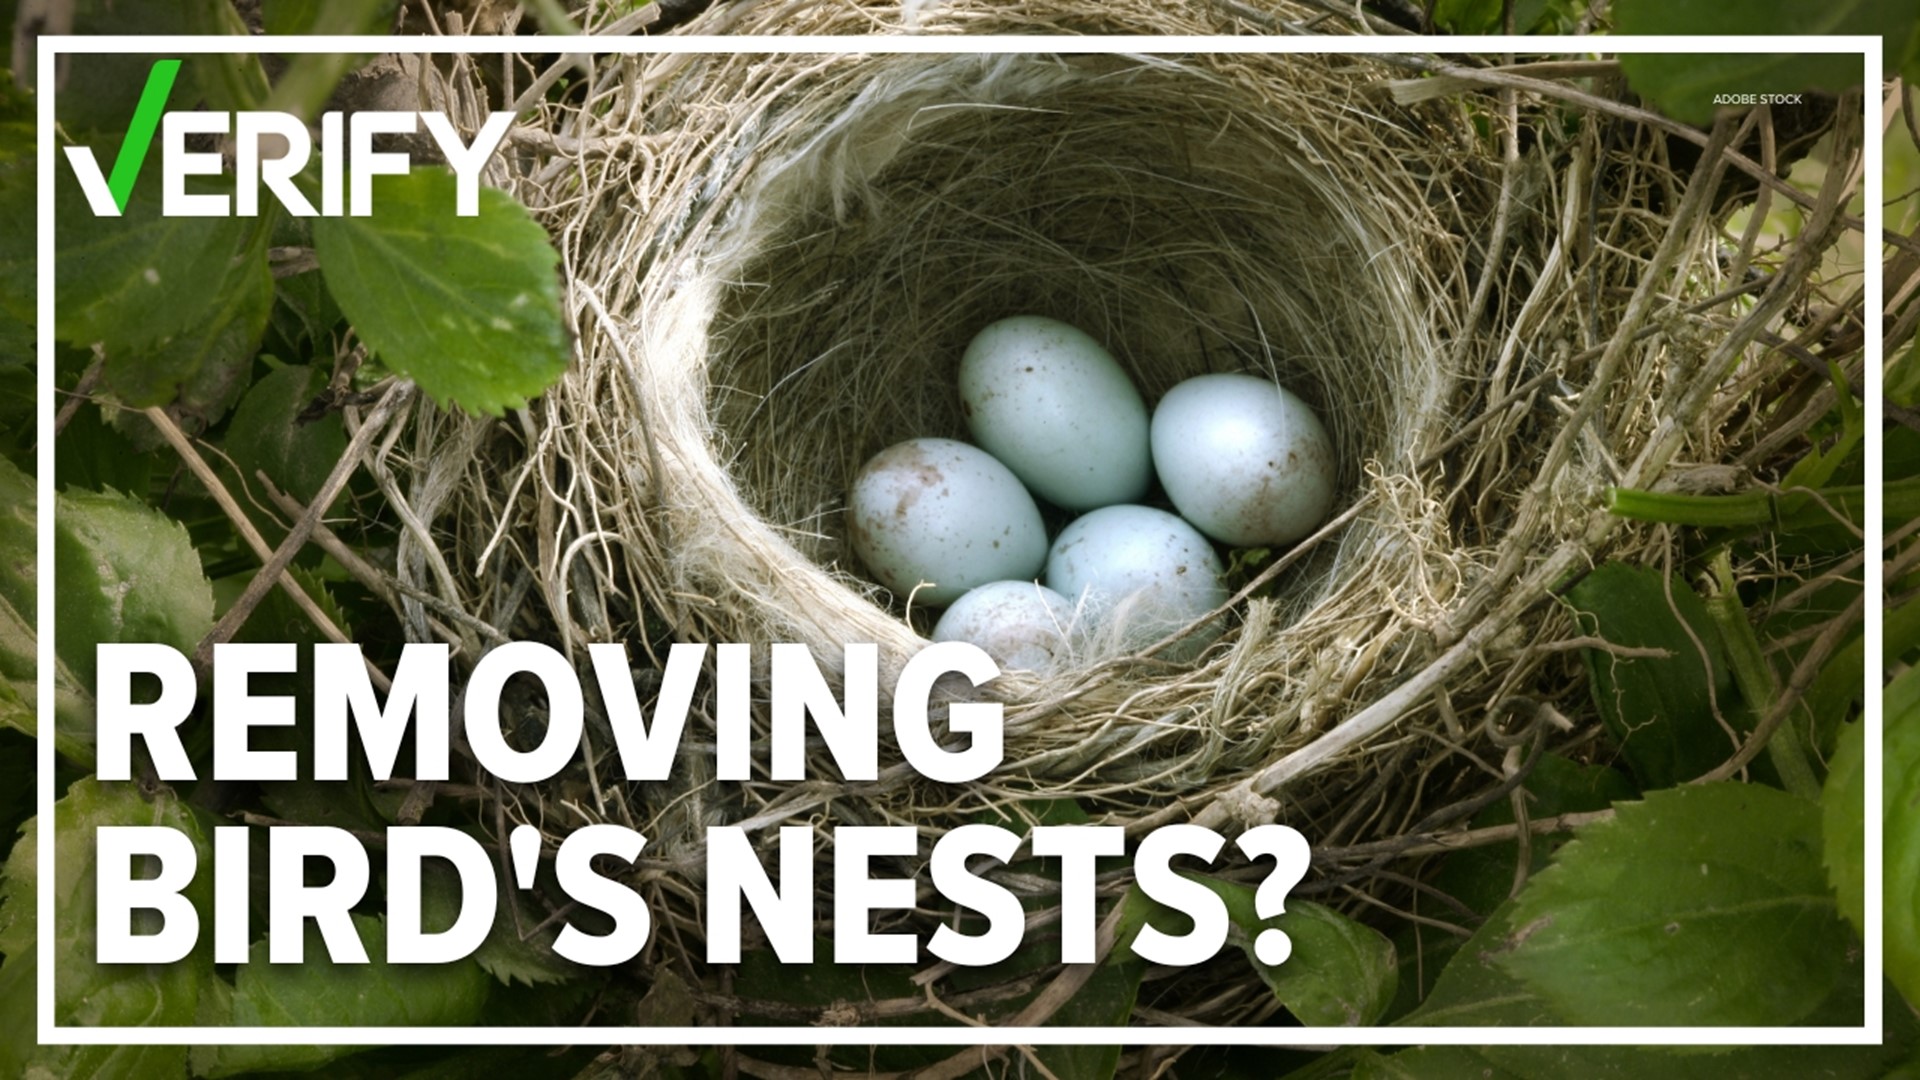 If an investigation does find someone illegally removed a bird's nest the fine would be no more than $250.